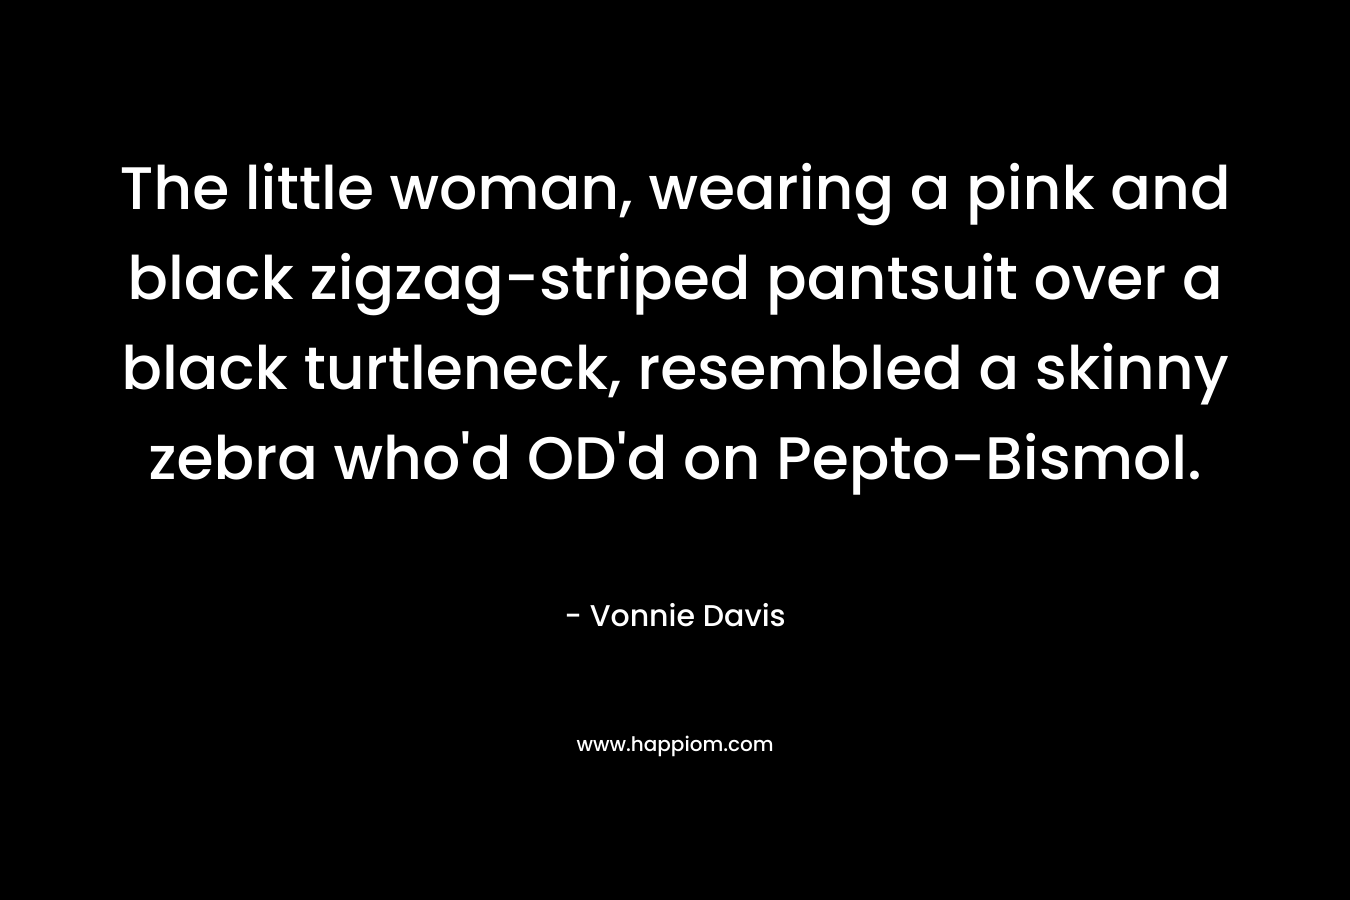 The little woman, wearing a pink and black zigzag-striped pantsuit over a black turtleneck, resembled a skinny zebra who'd OD'd on Pepto-Bismol.